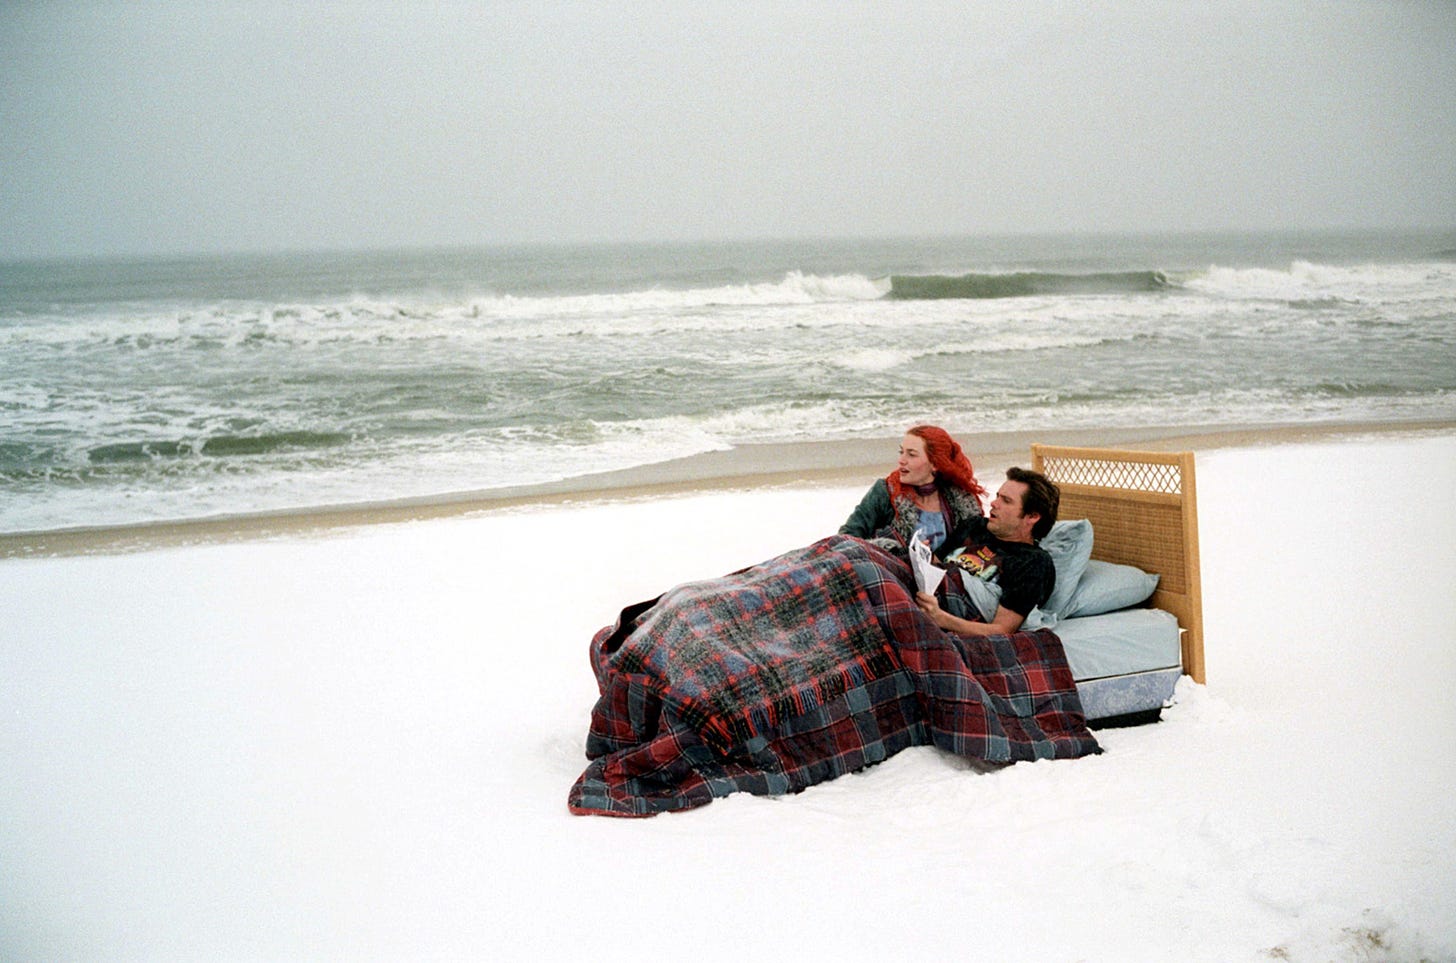 How to Watch 'Eternal Sunshine of the Spotless Mind' Online Stream